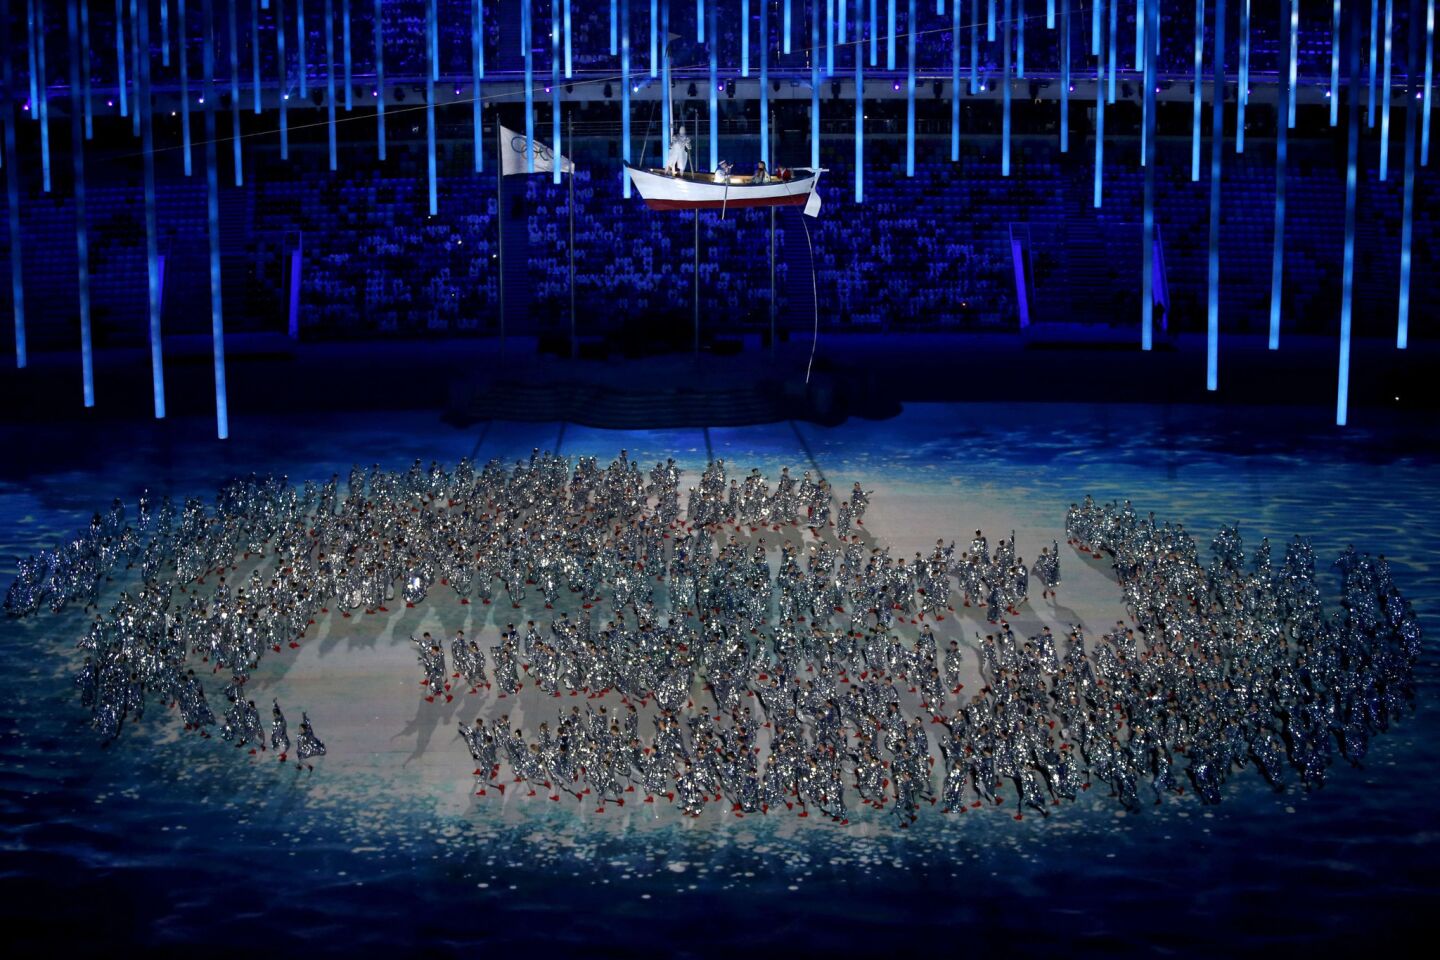 Dancers perform at the start of the 2014 Sochi Winter Olympics Closing Ceremony.